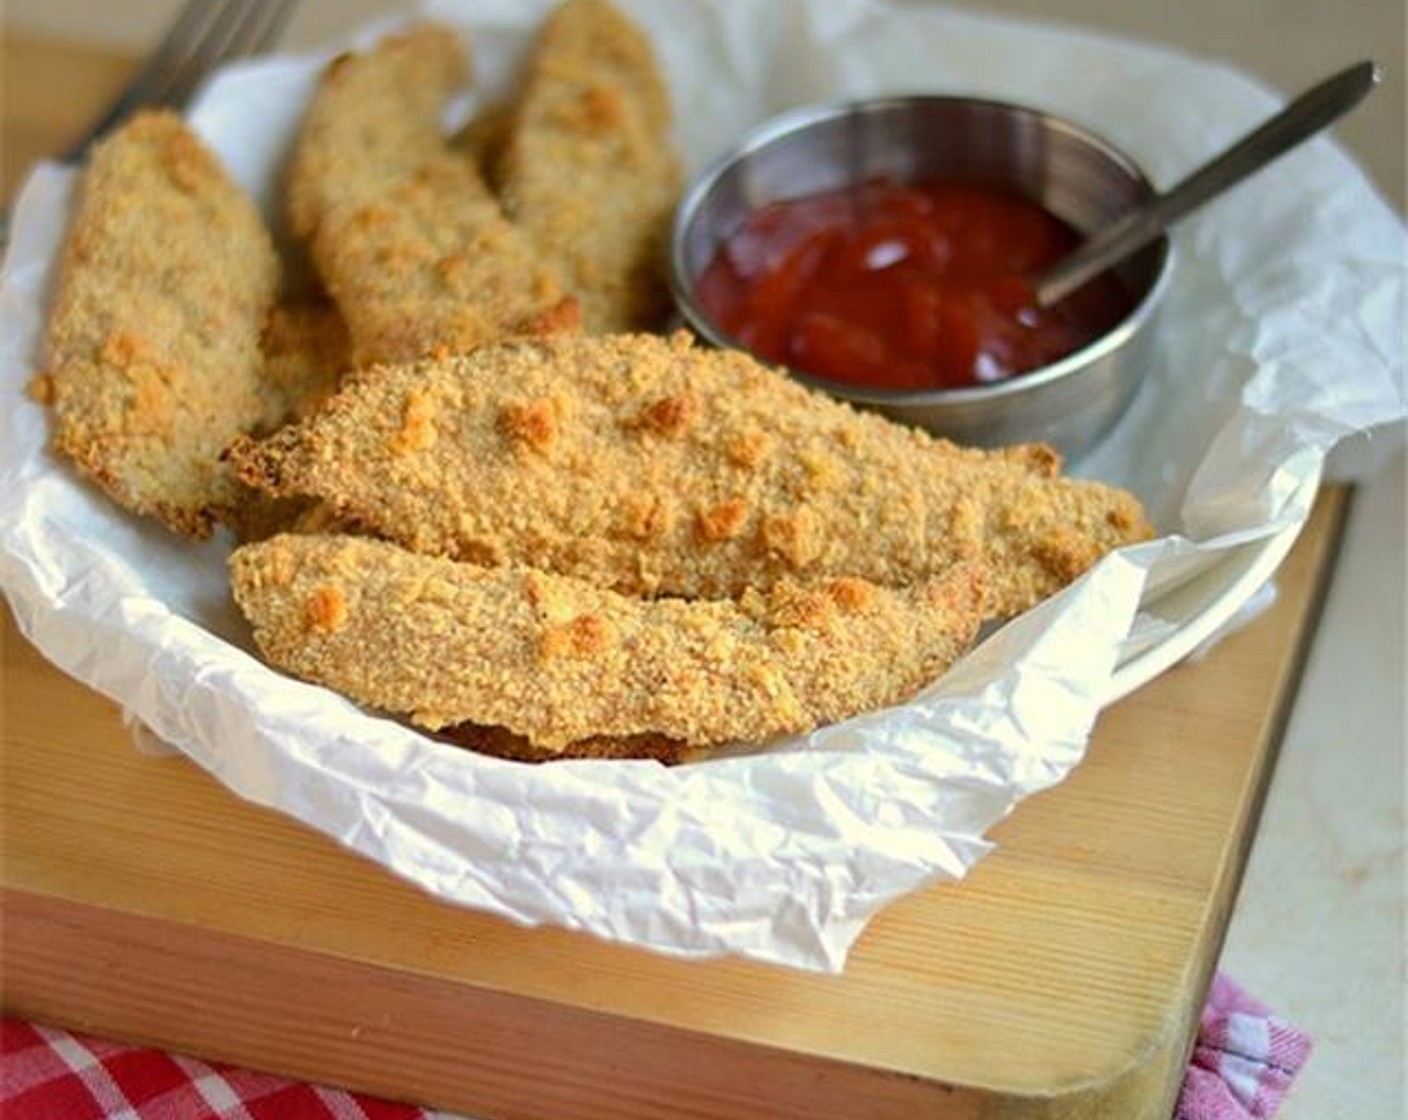 Baked "Fried" Chicken Fingers